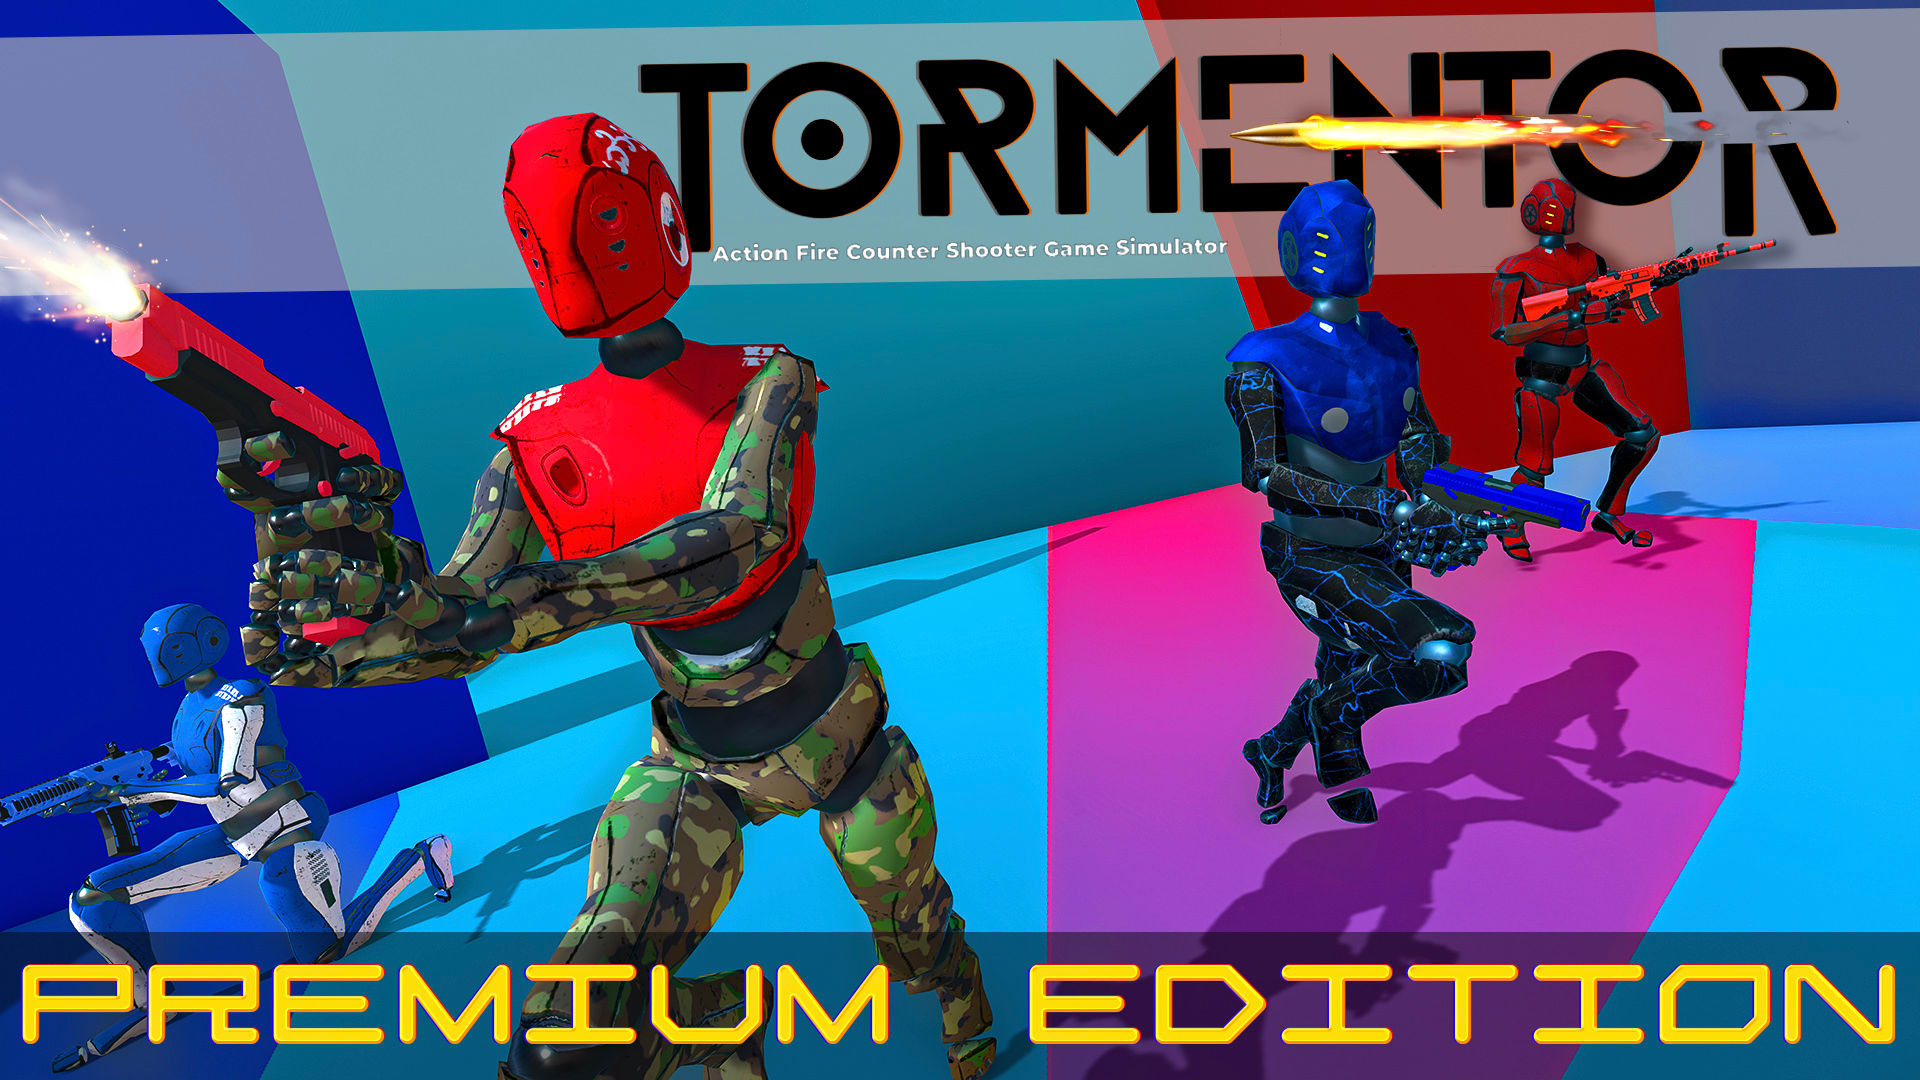 Tormentor-Action Fire Counter Shooter Game Simulator - PREMIUM EDITION 1